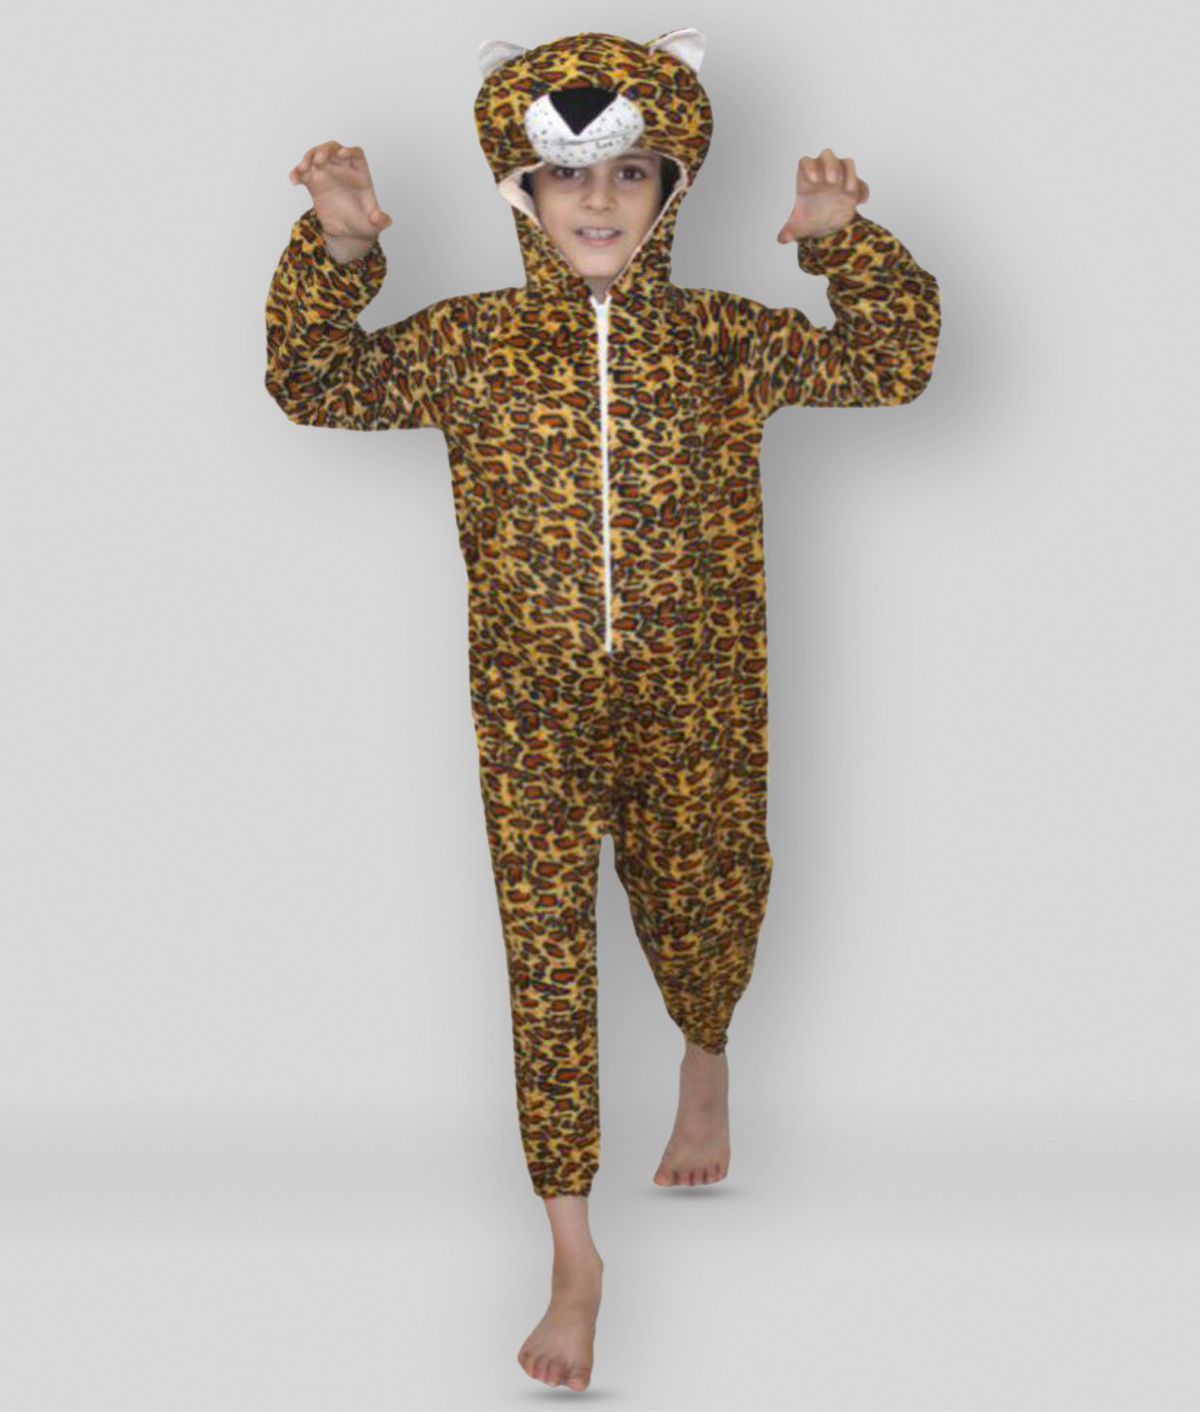     			Kaku Fancy Dresses Lion/ Tiger Animal Costume For Kids School Annual function/Theme Party/Competition/Stage Shows/Birthday Party Dress